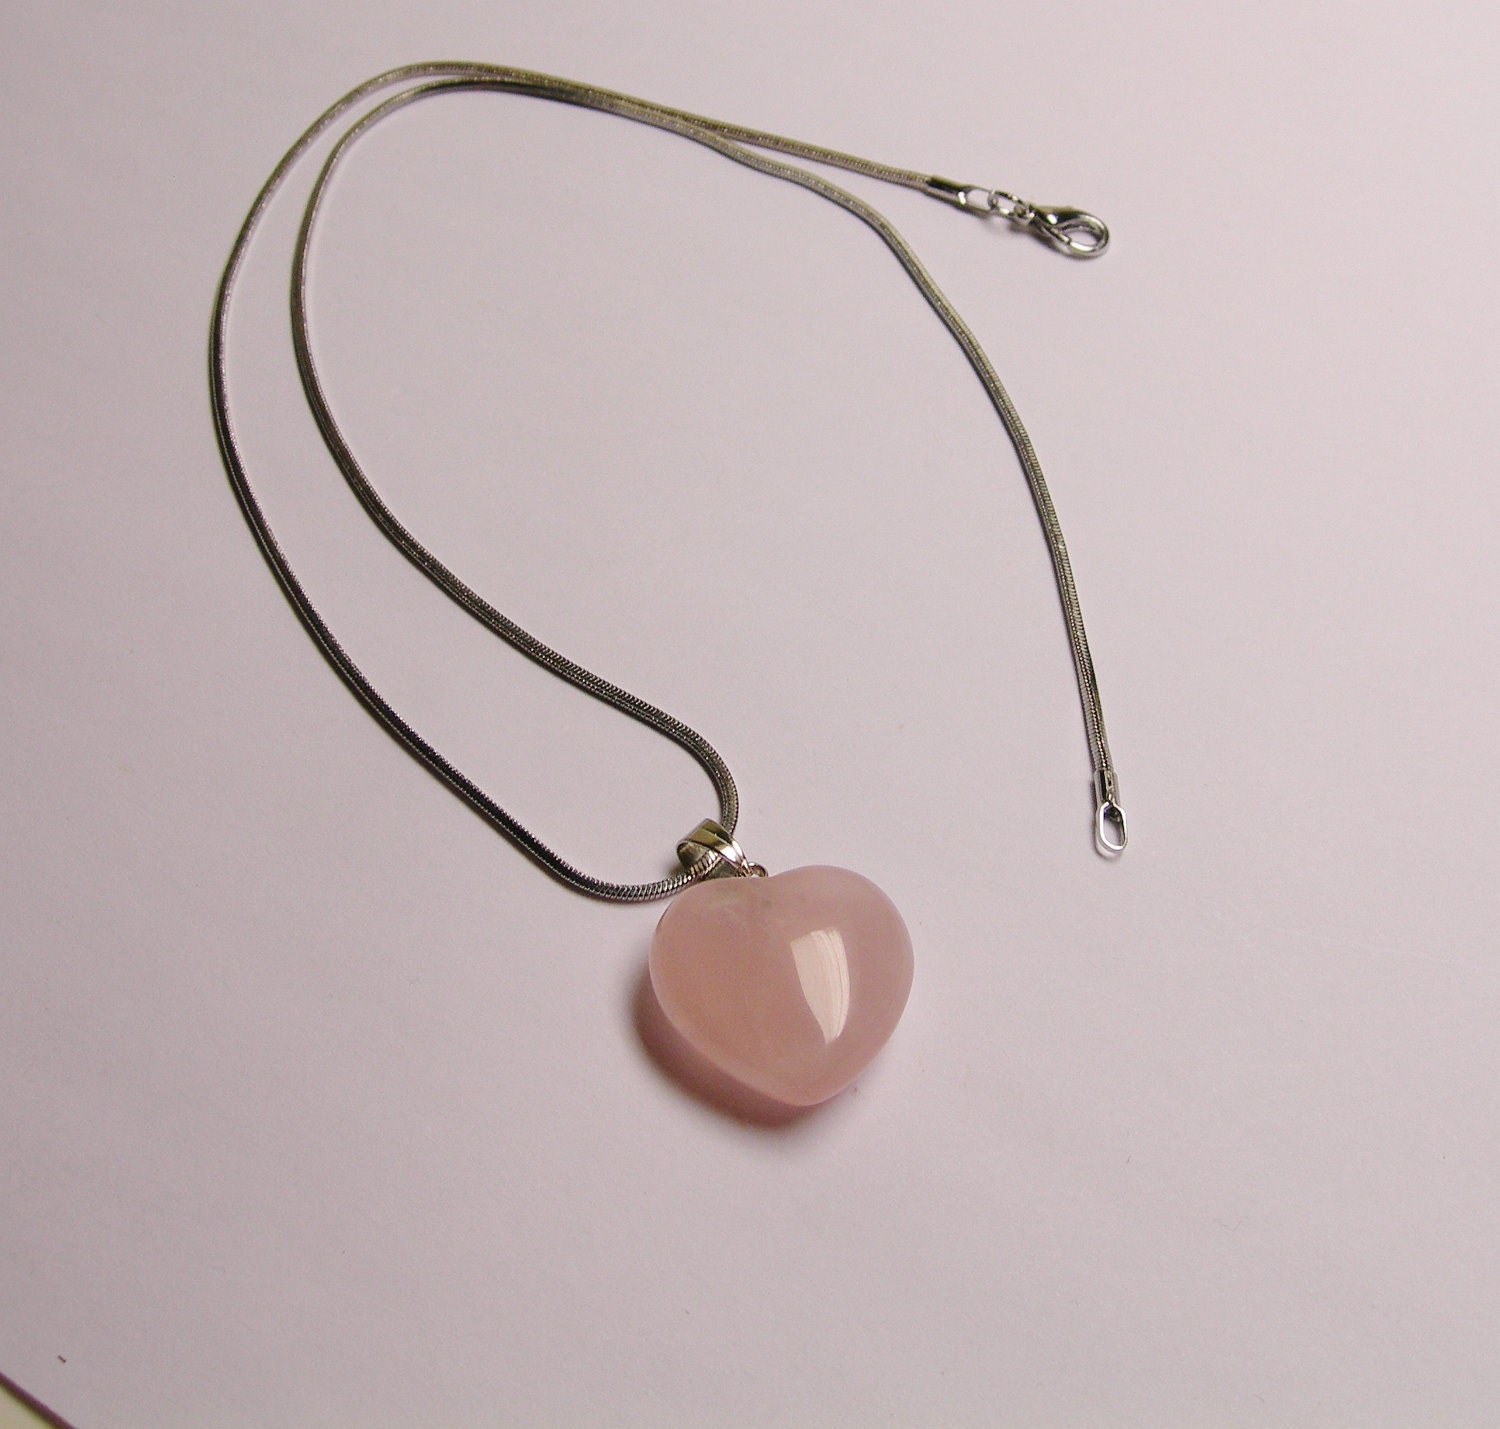 rose quartz heart necklace meaning